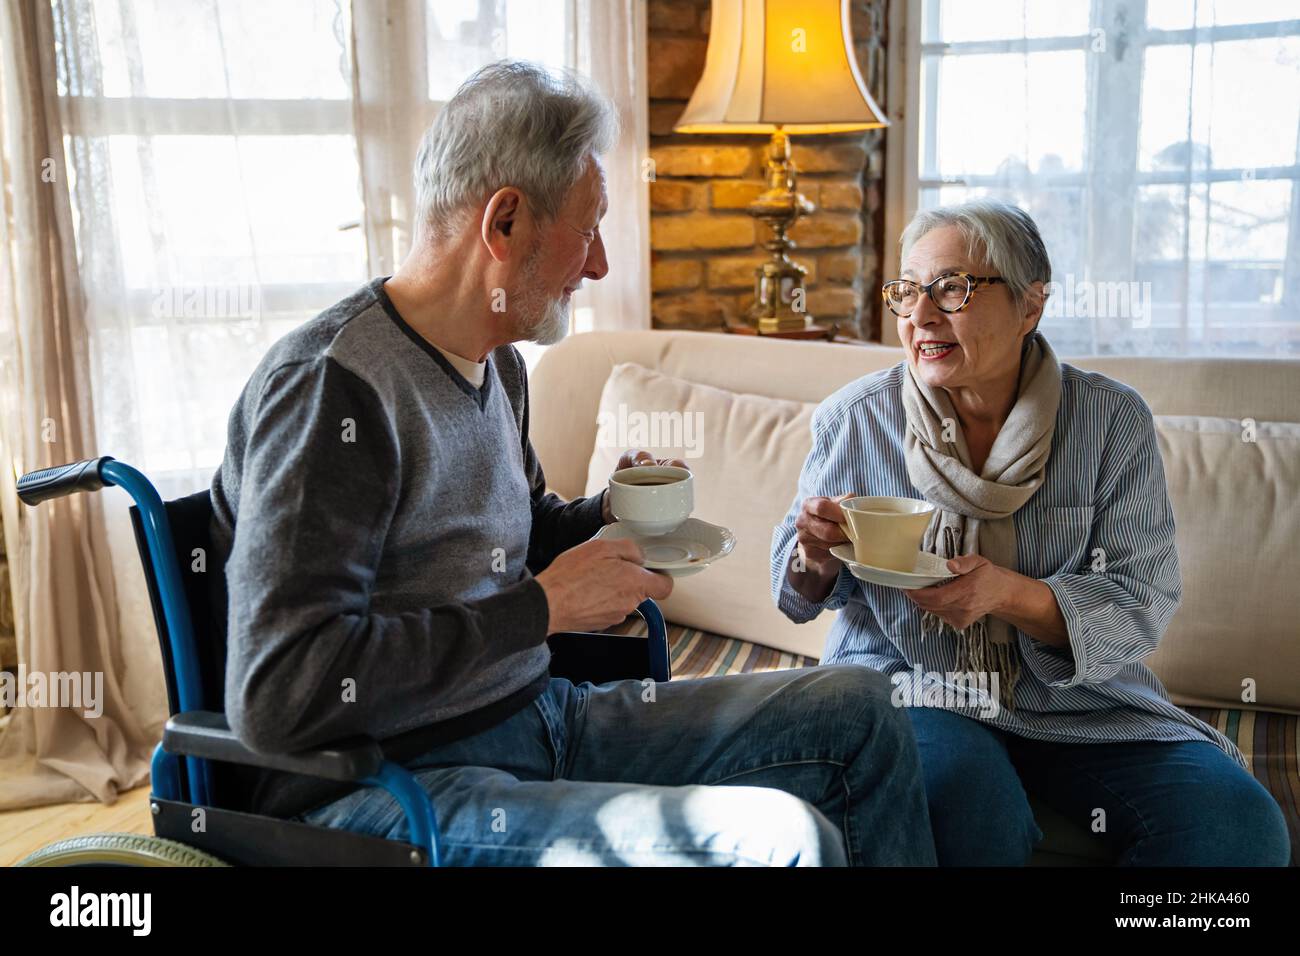 Mature man with disability in wheelchair. Happy retired senior couple having fun at home. Stock Photo